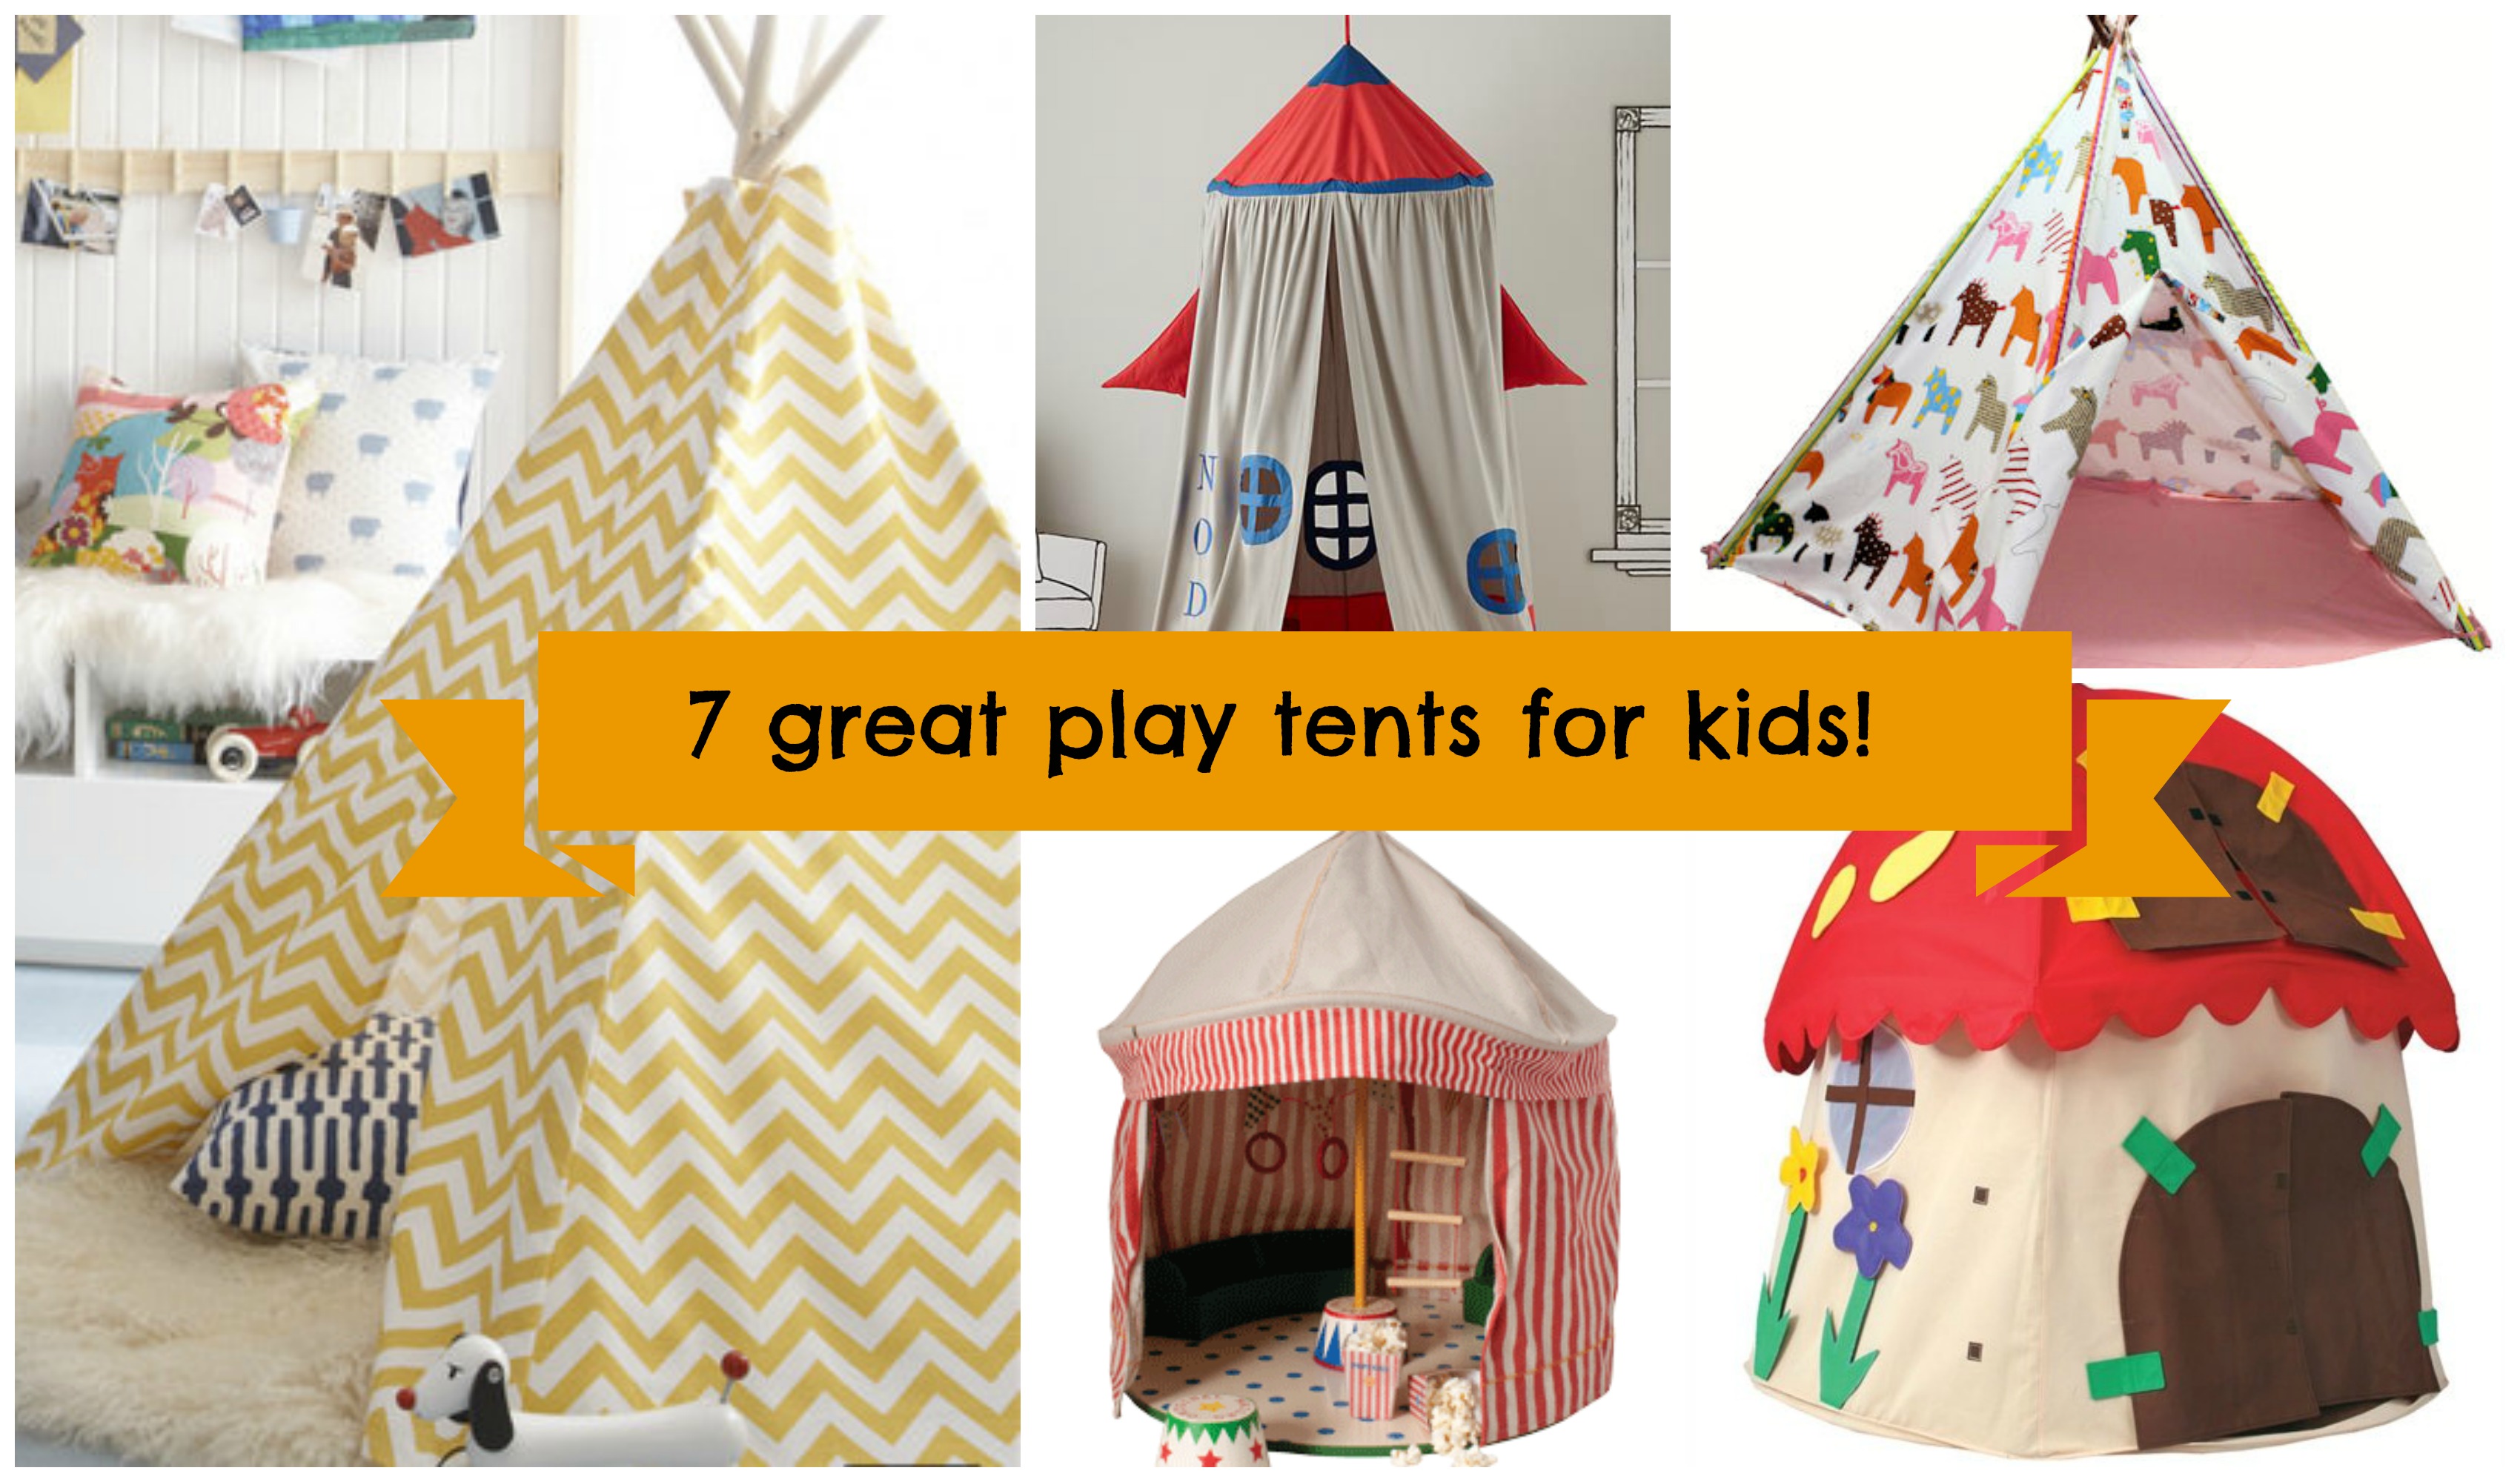 7 great play tents/tee pees